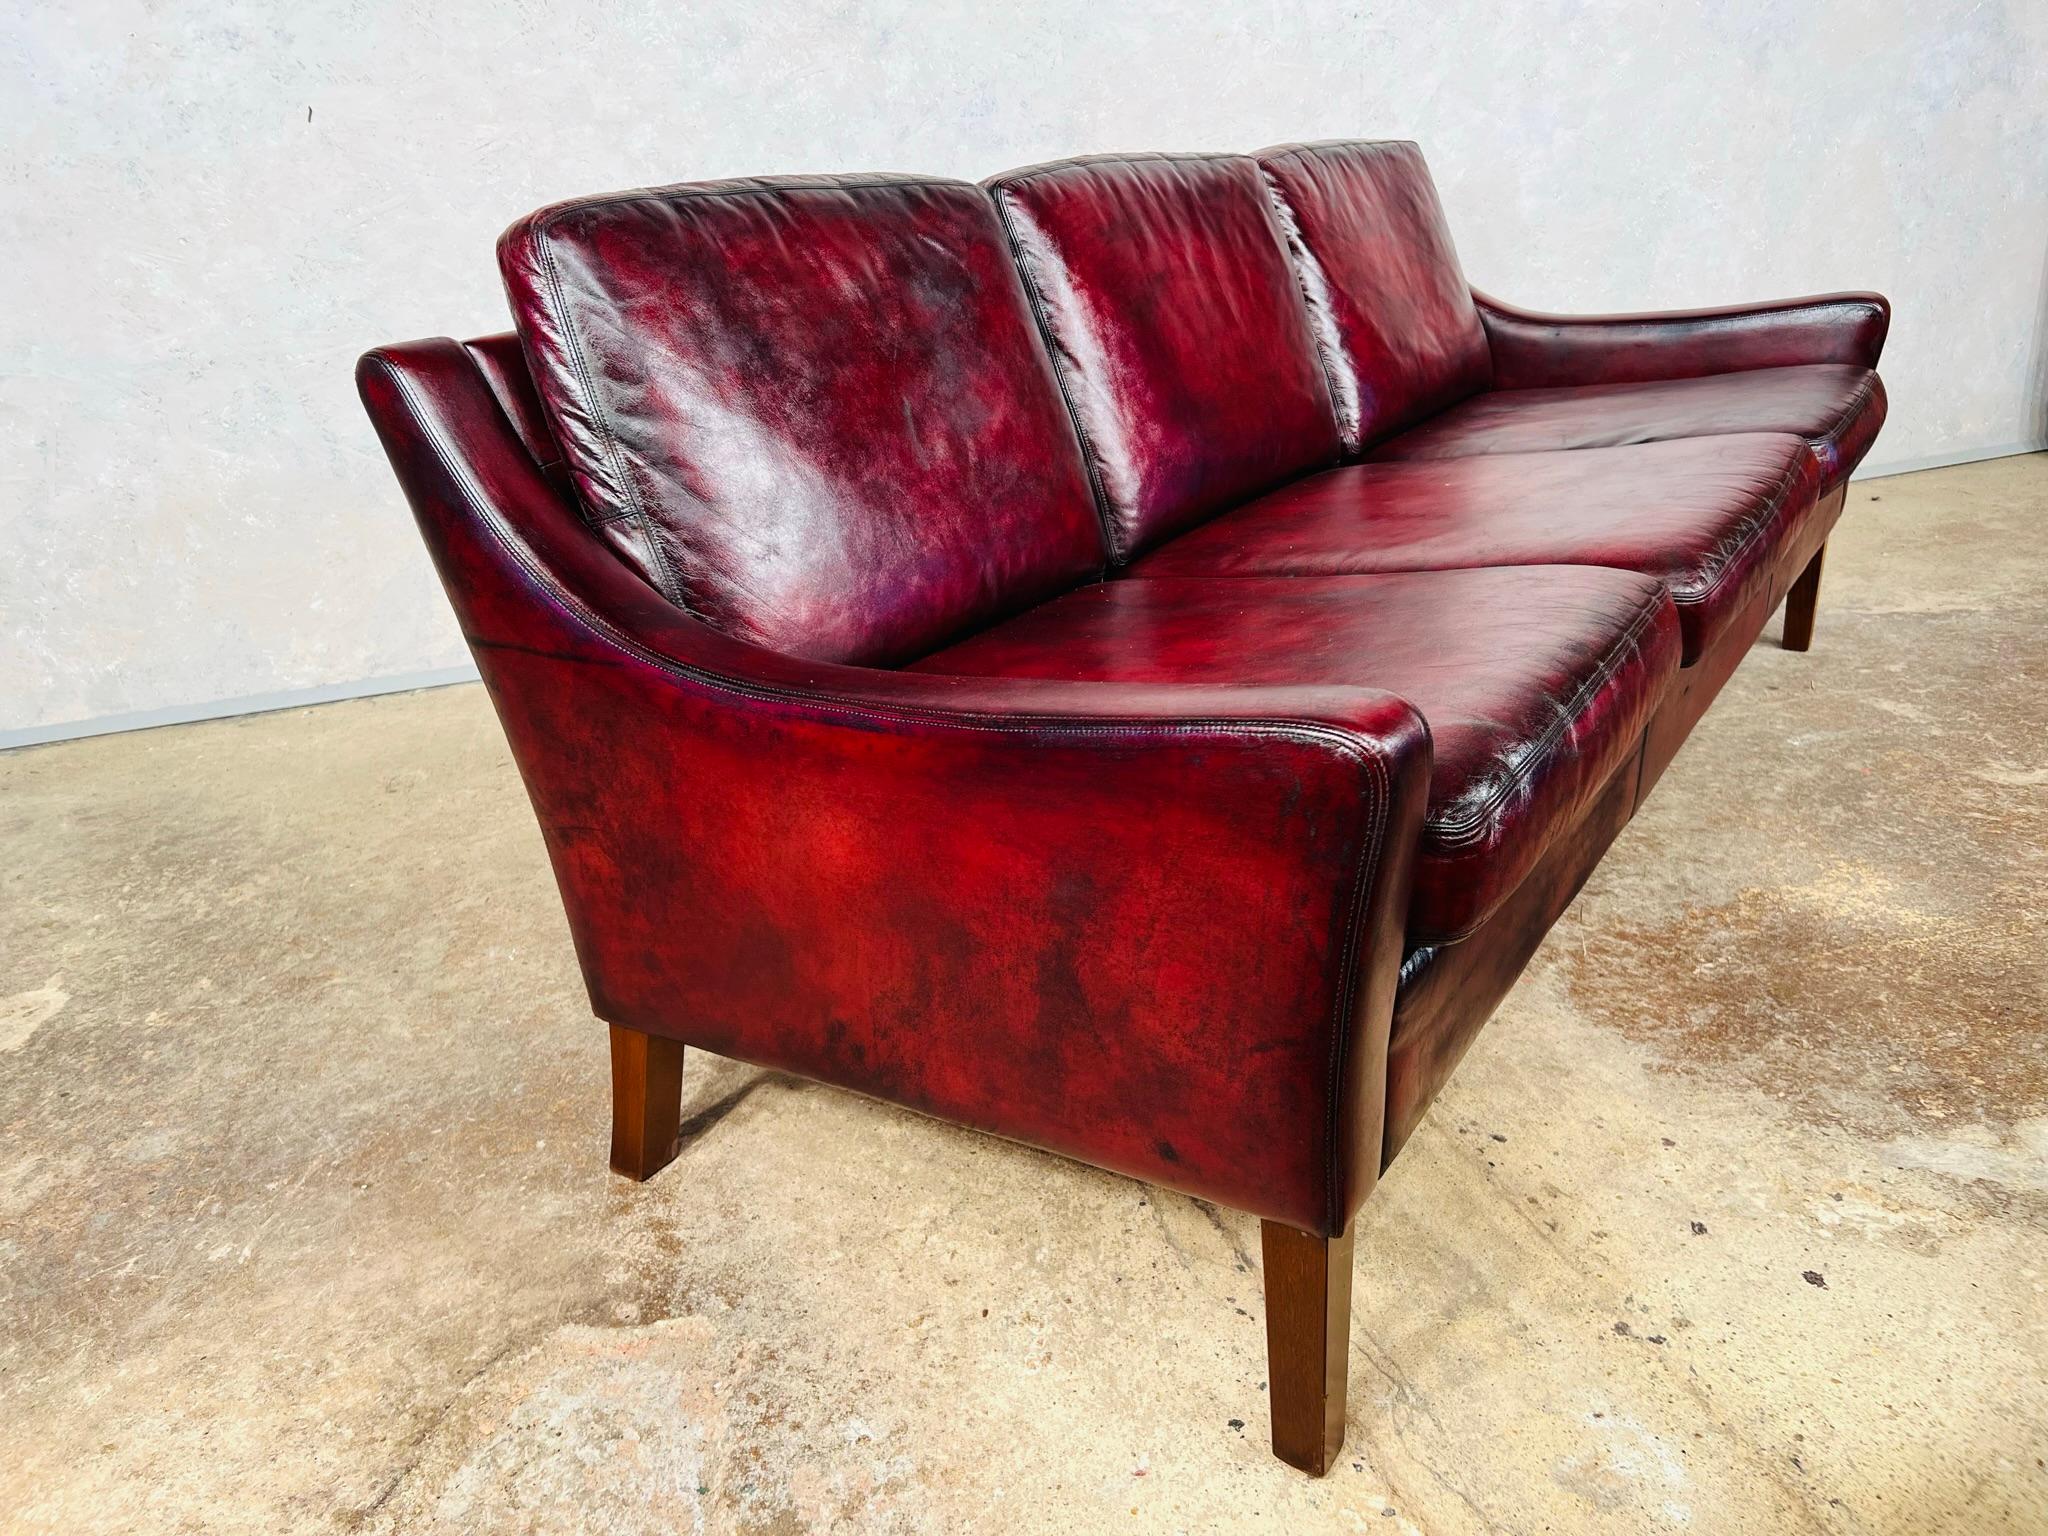 A Compact Vintage Danish 1970s Deep Red Three Seater Leather Sofa For Sale 1